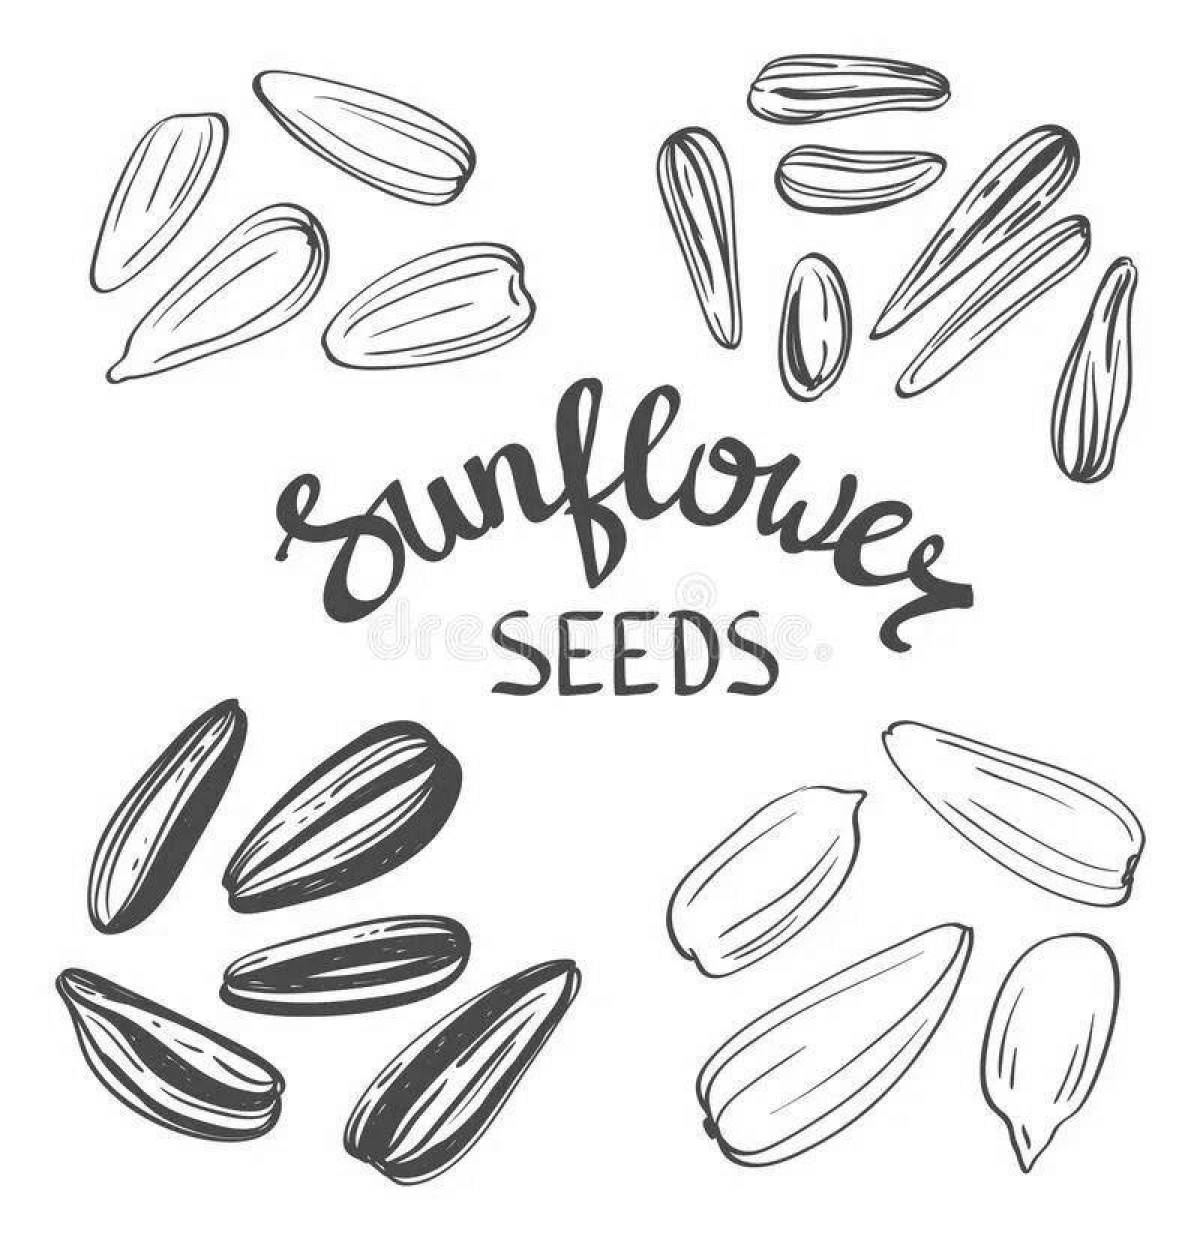 Sparkling seeds coloring book